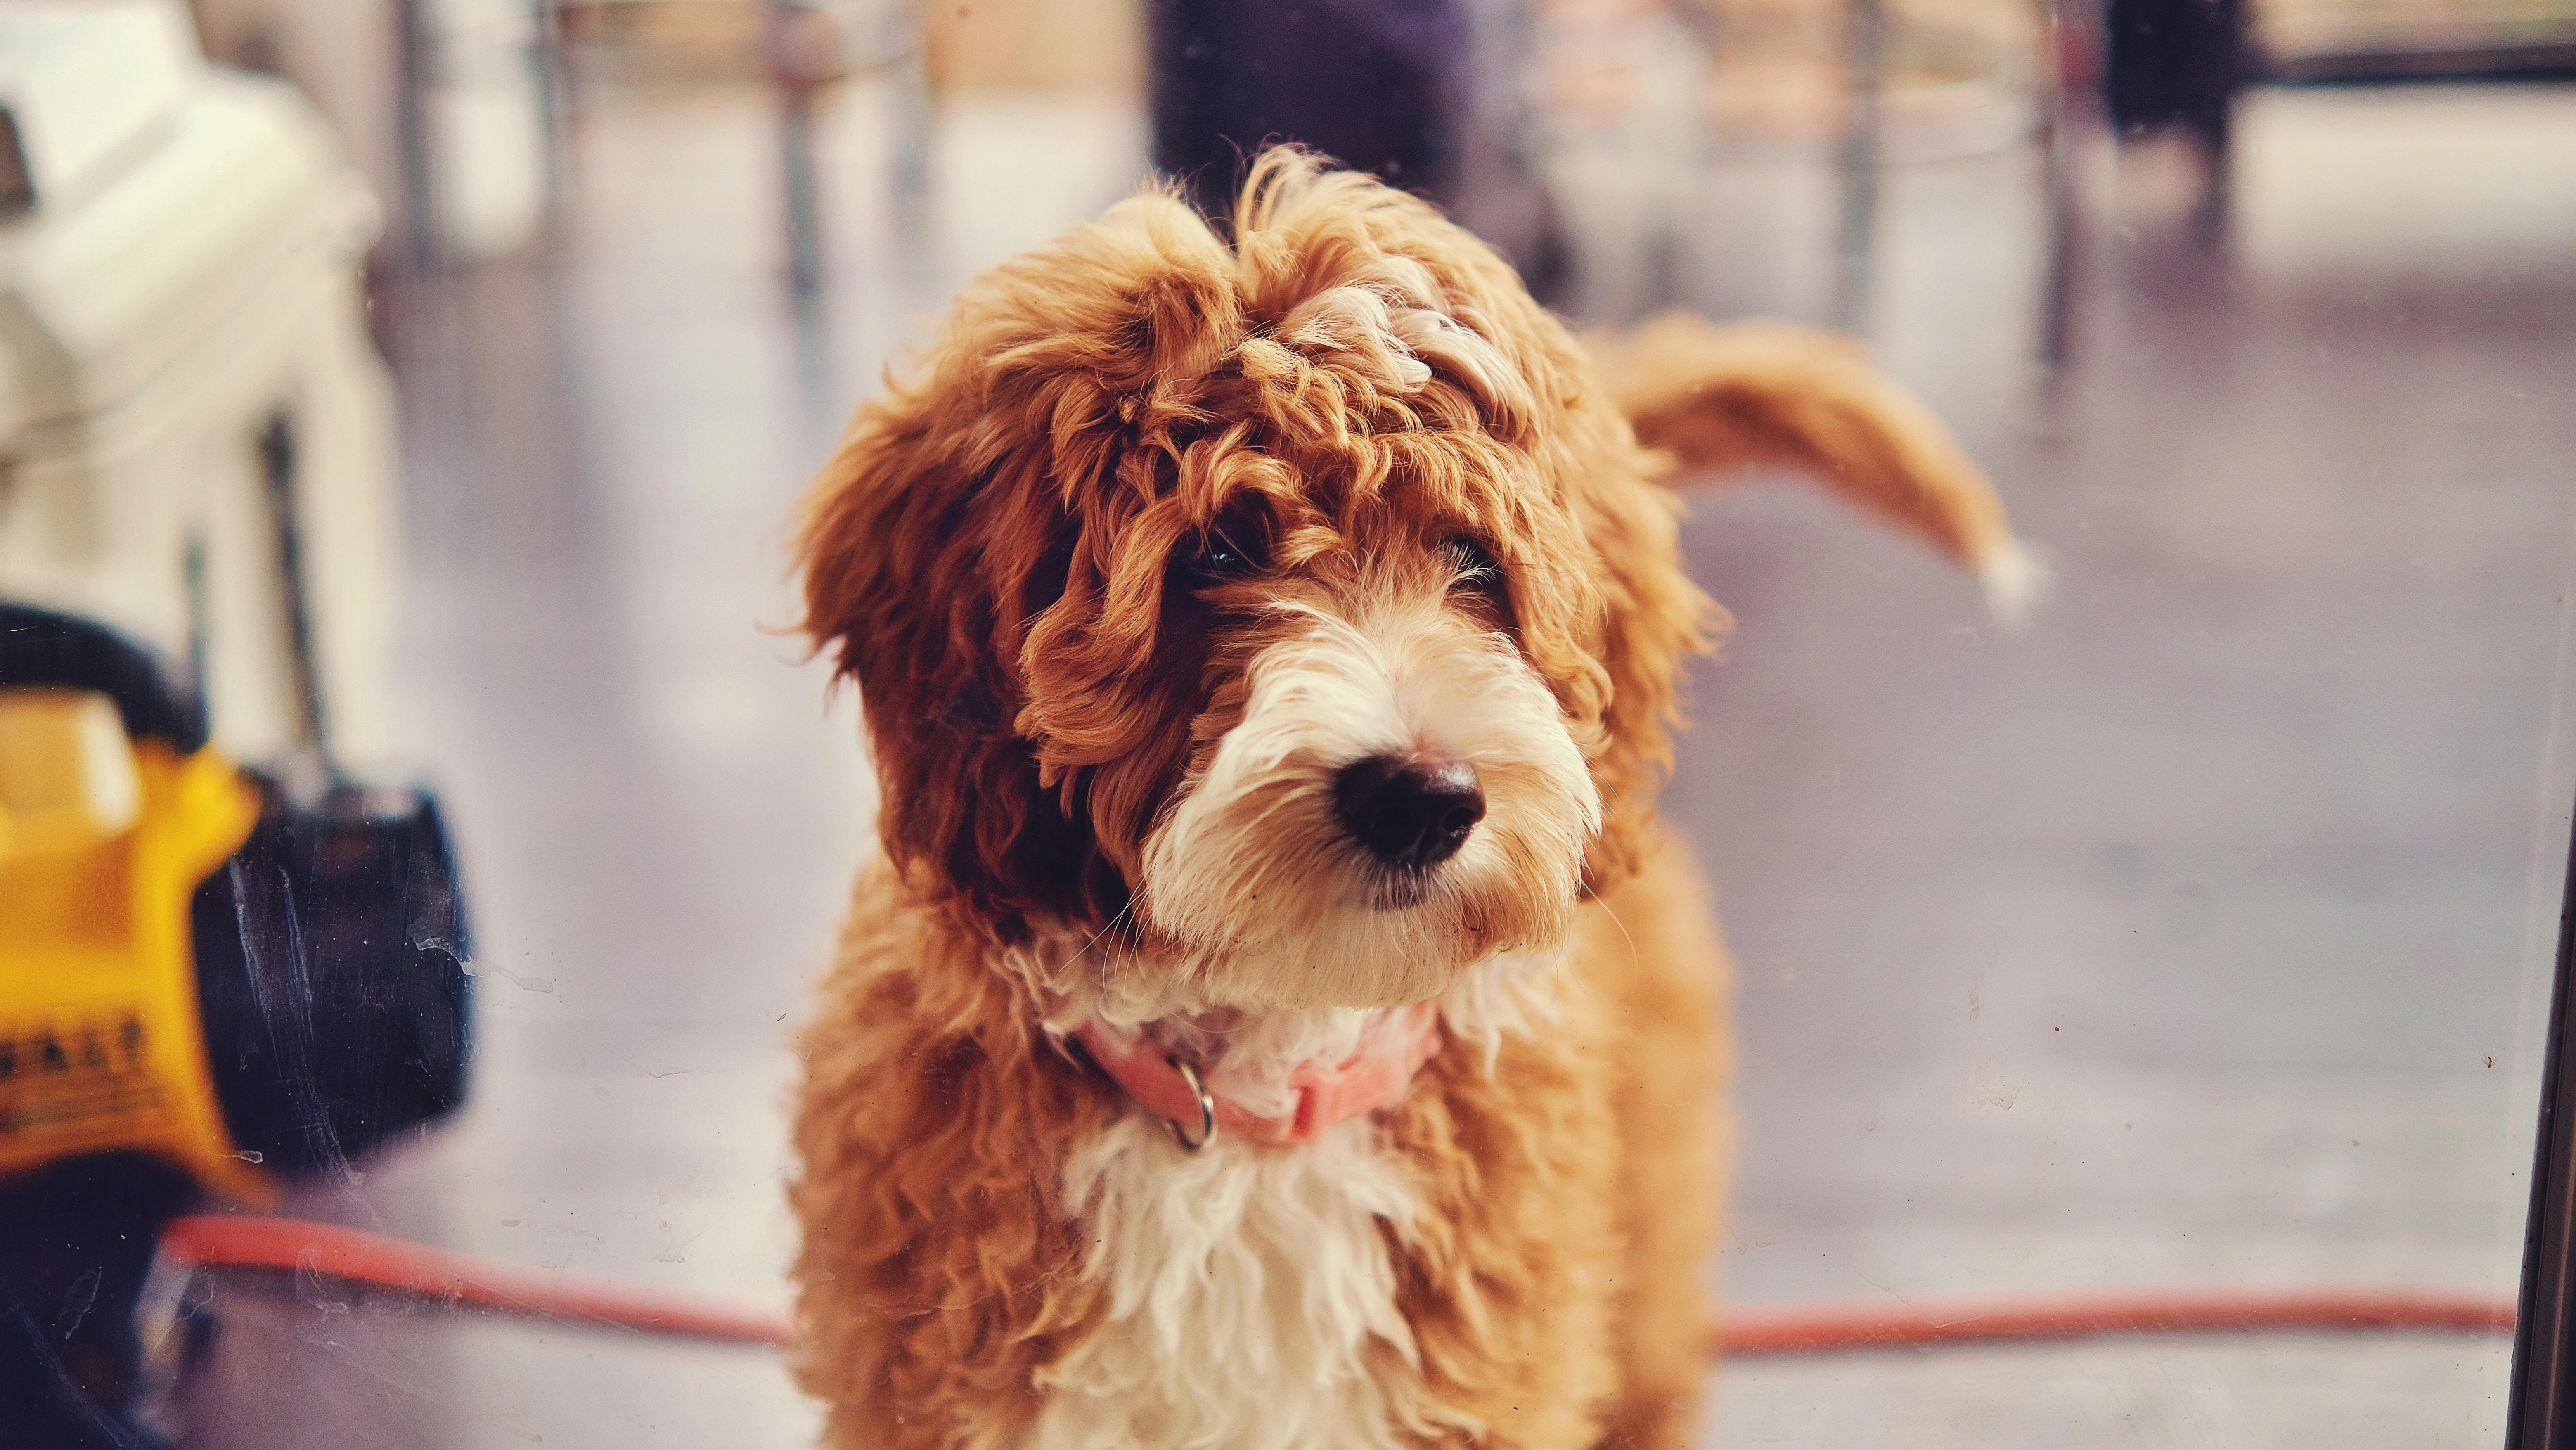 "How to Choose the Best Dog Food for Your Goldendoodle"